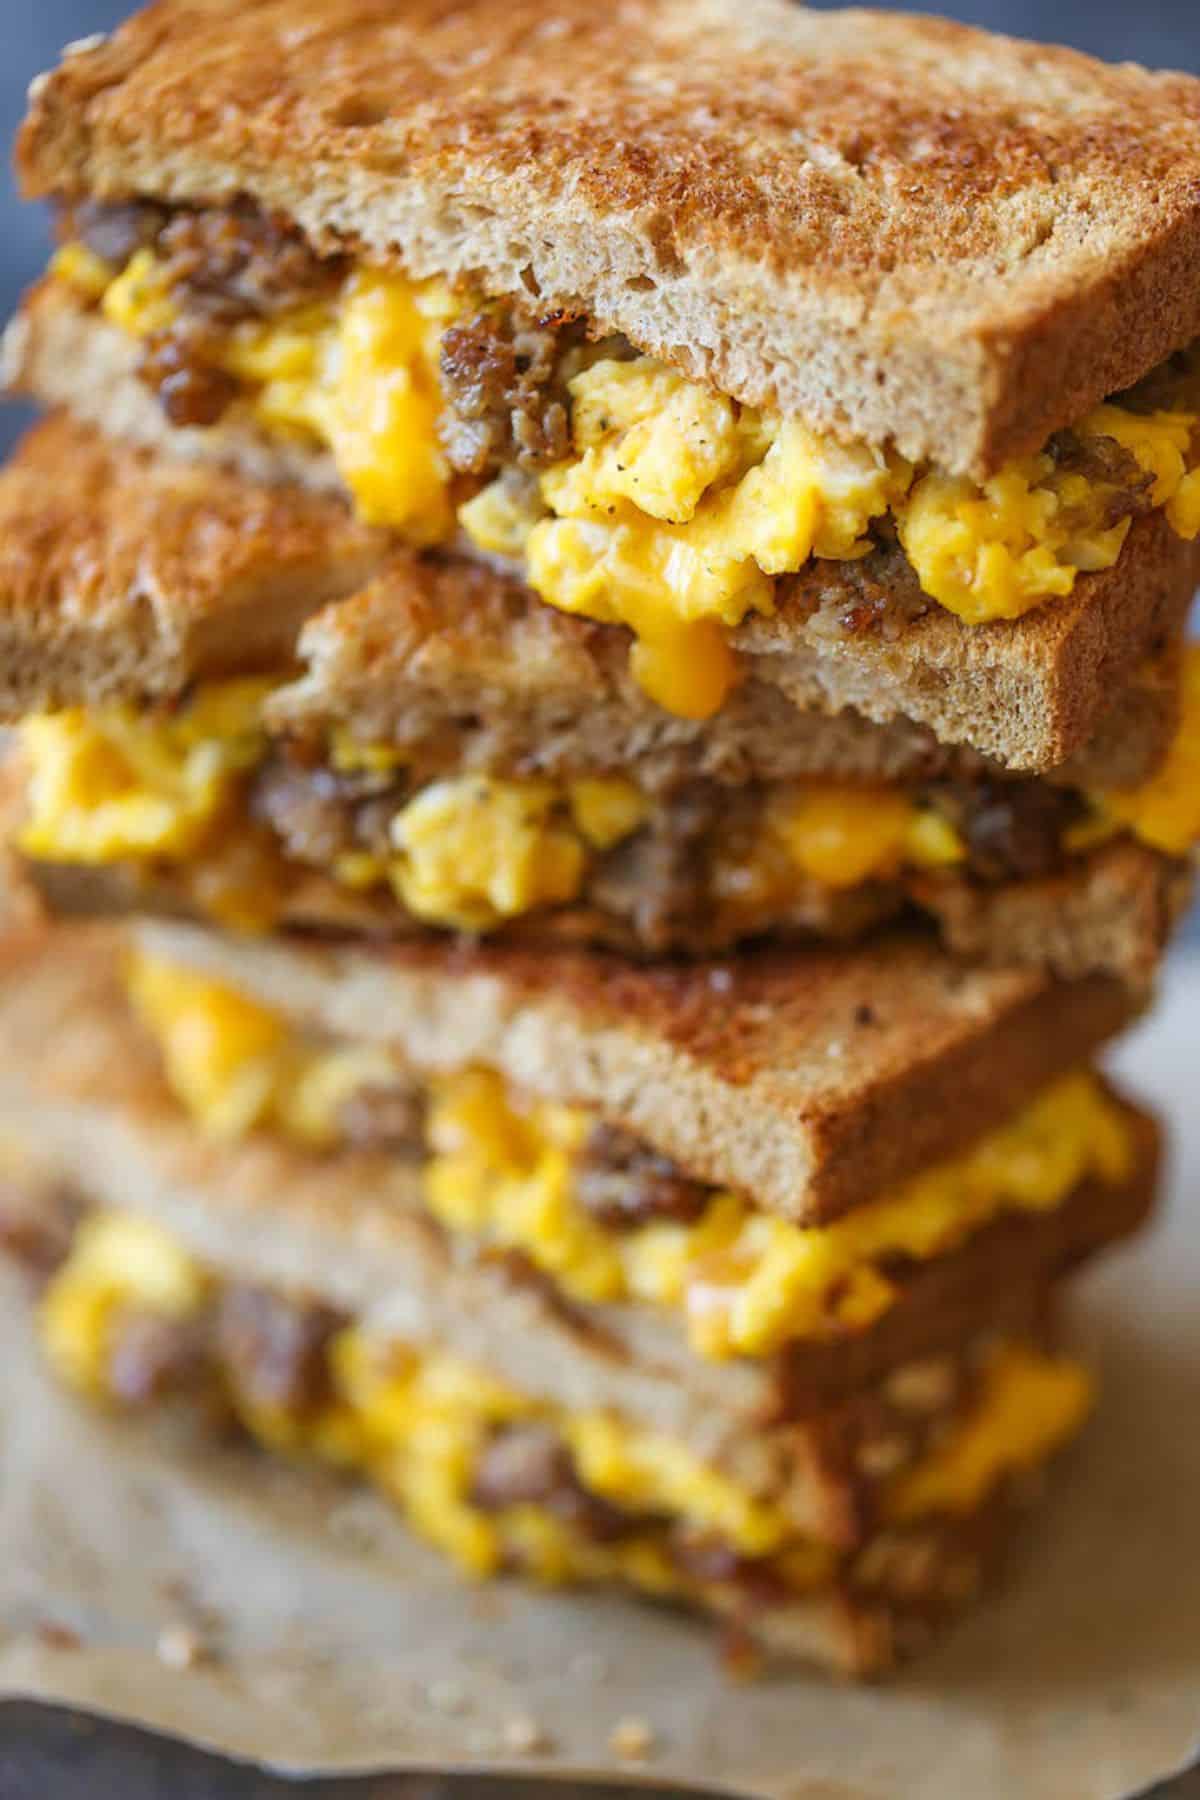 A pile of breakfast grilled cheese sandwiches.